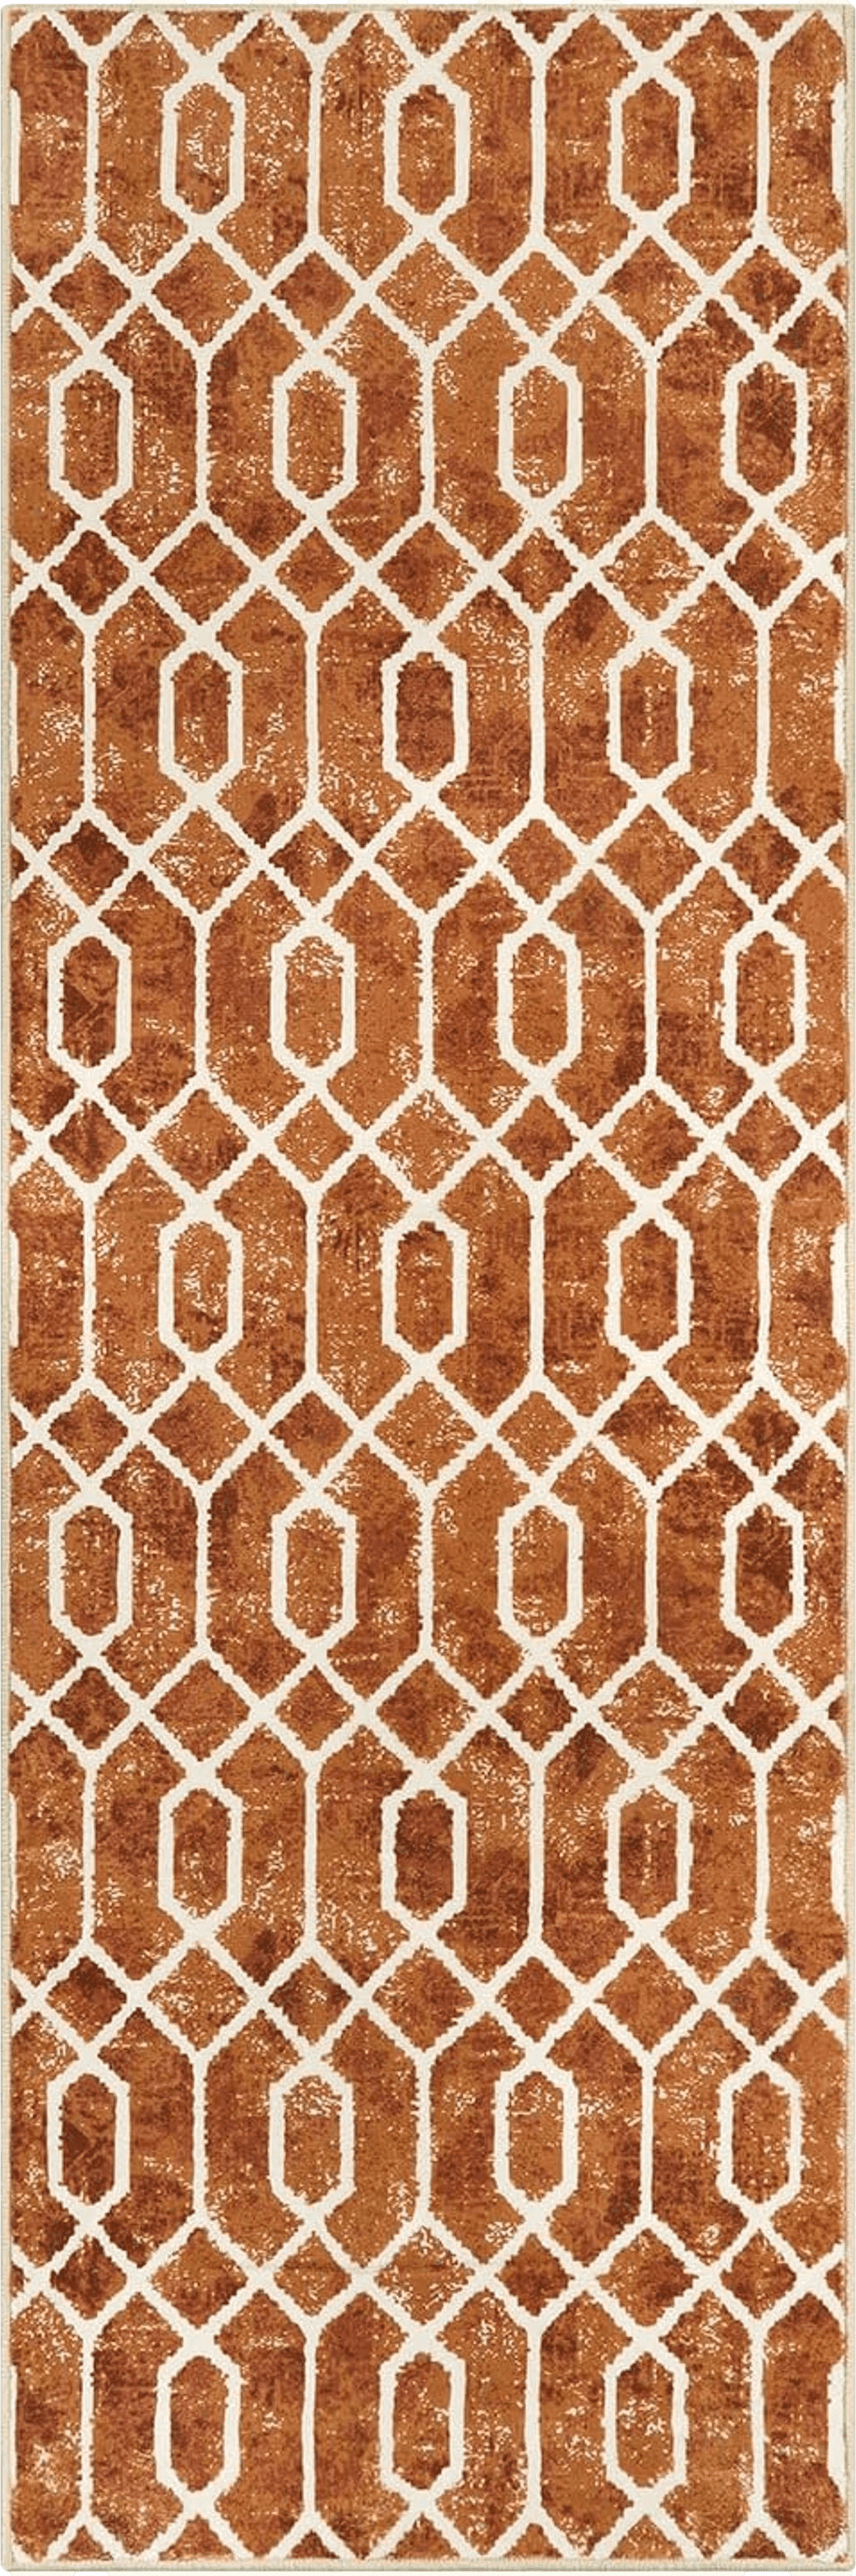 Runner All Runners Lahome Carpet Runner Geometric Washable Runner Rug, 2x6 Kitchen Runner with Rubber Backing Distressed Trellis Entry Rug, Geometric Soft Low Pile Fall Rug Runners for Hallways Fall Decor